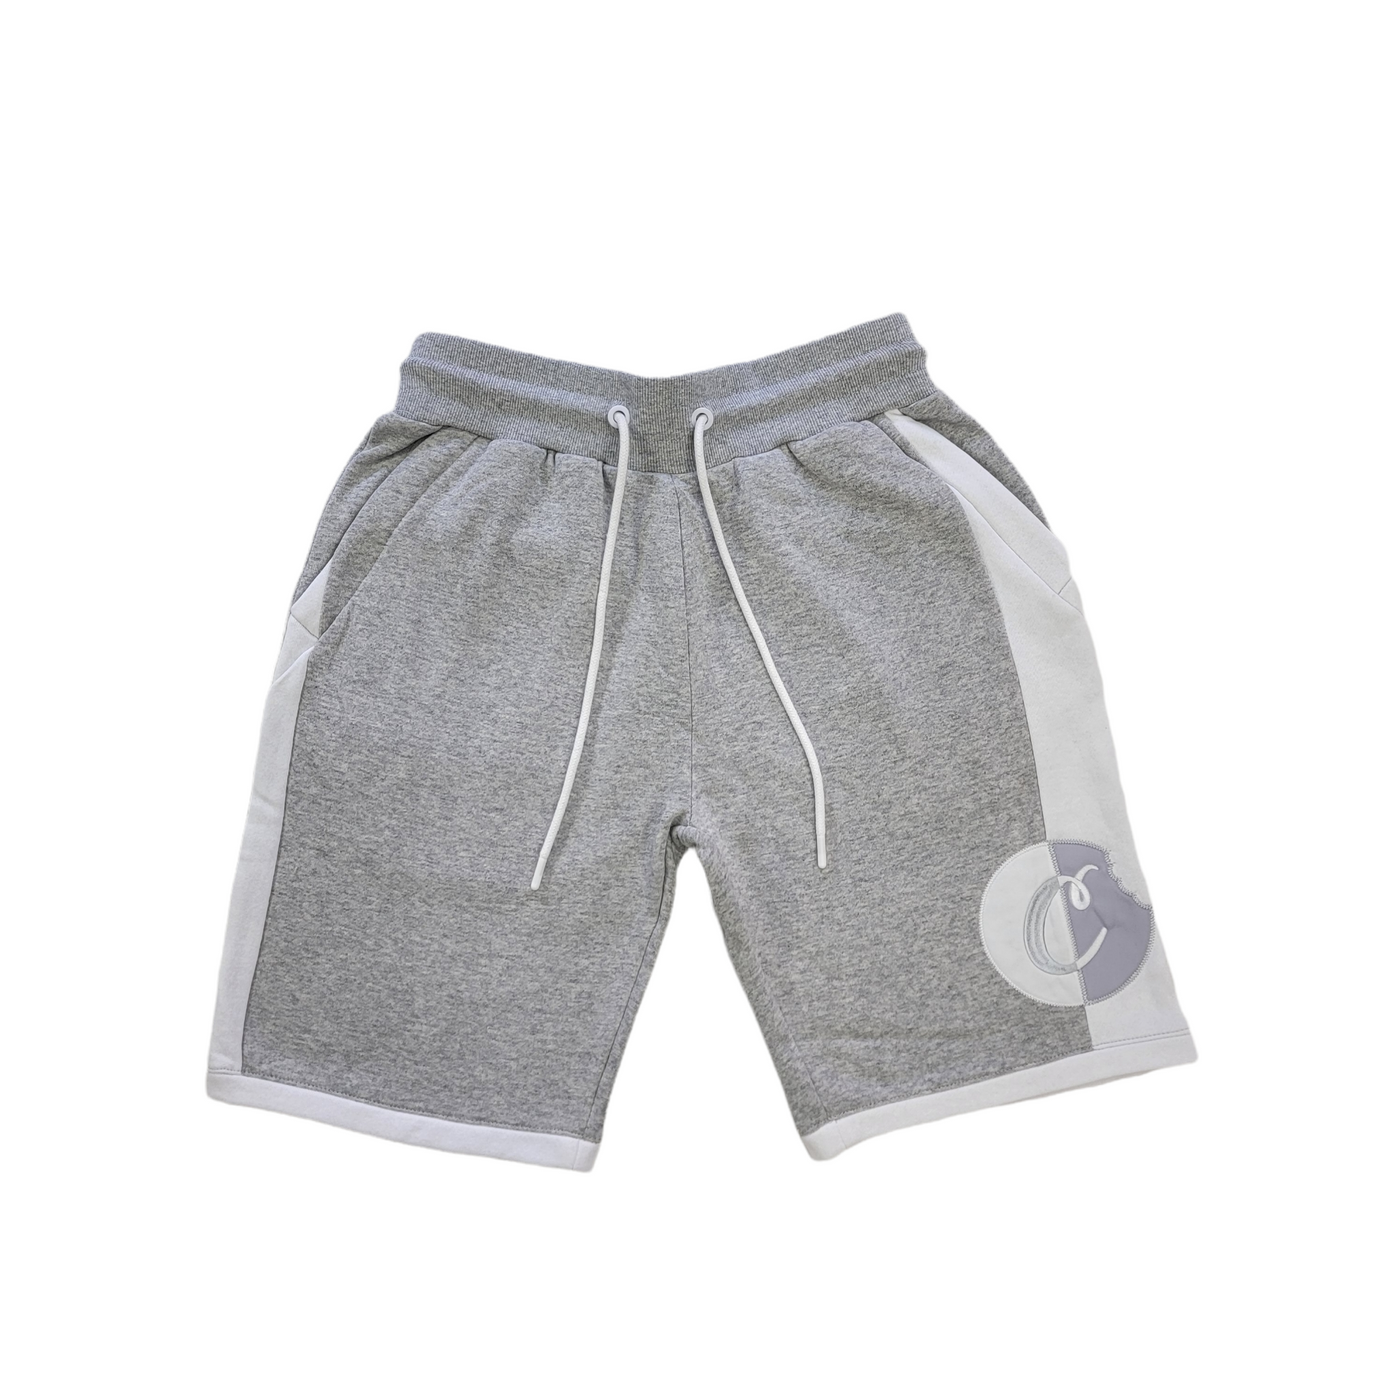 Cookies All City Cotton Jersey shorts